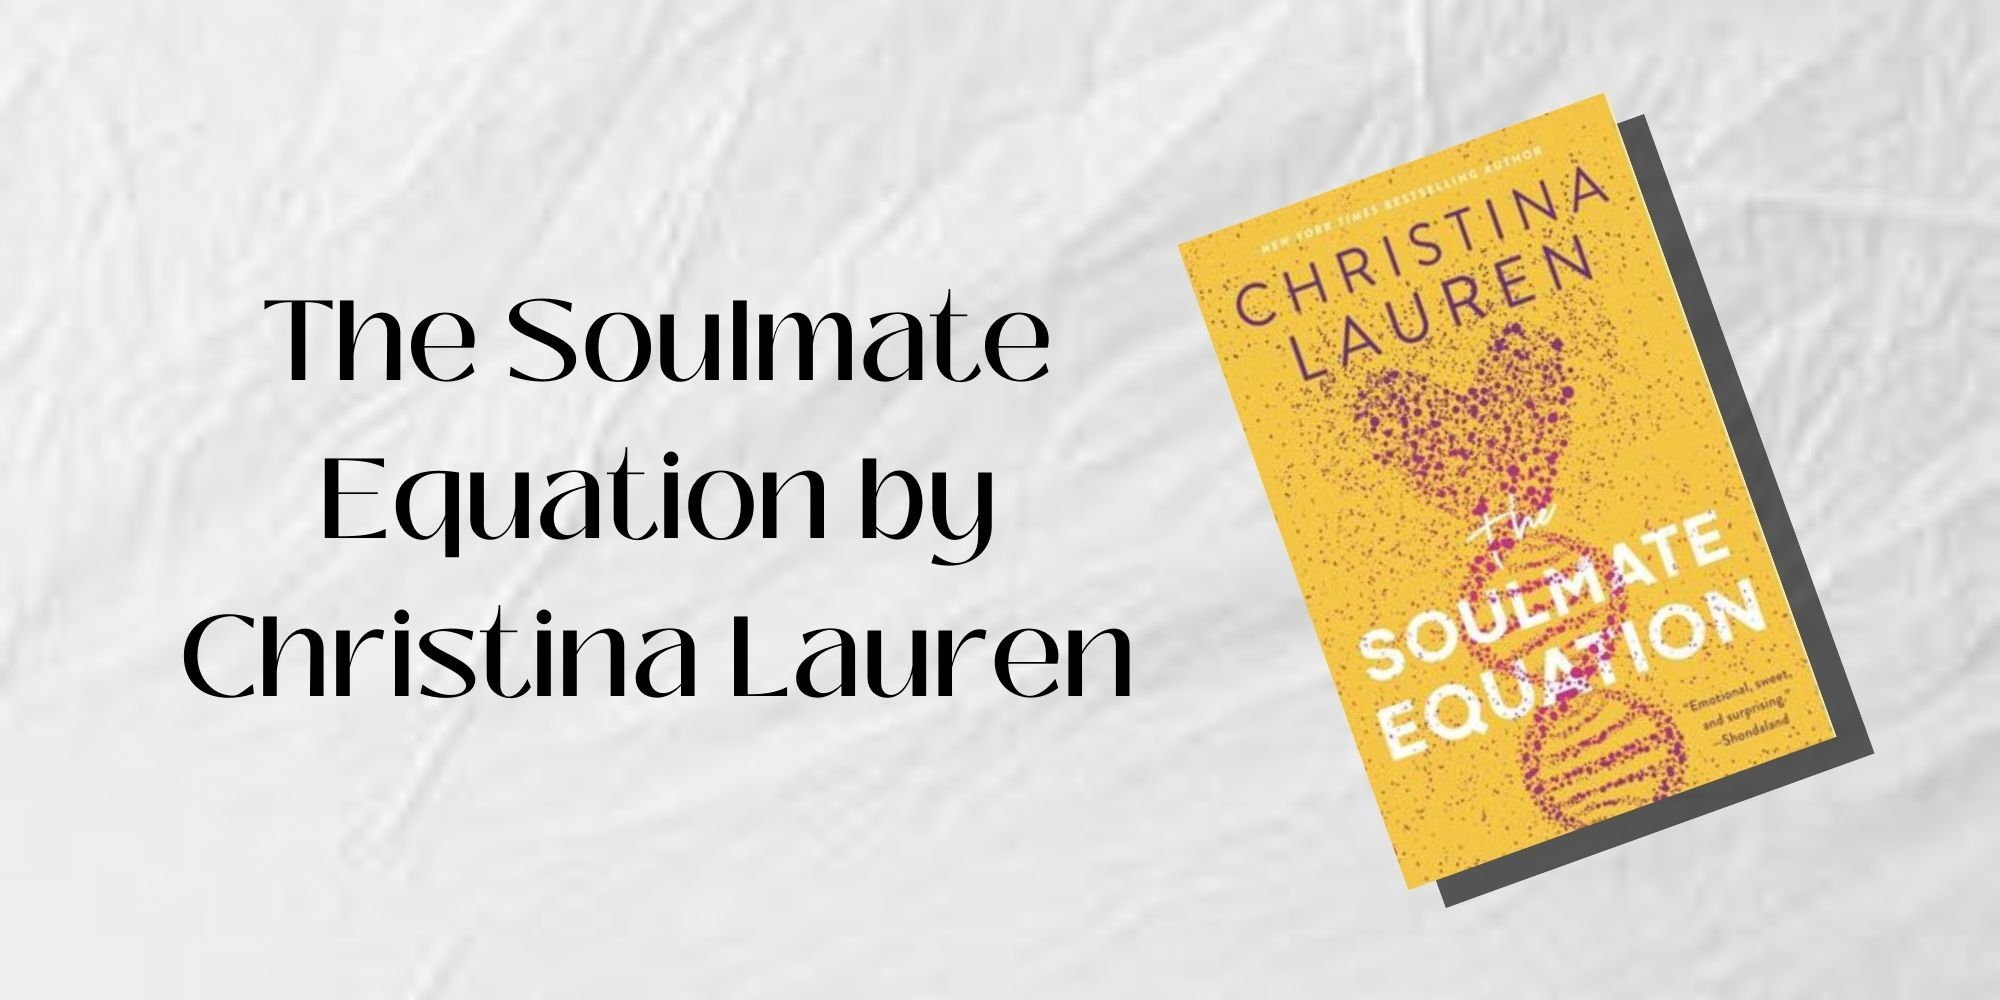 The cover of The Soulmate Equation by Christina Lauren